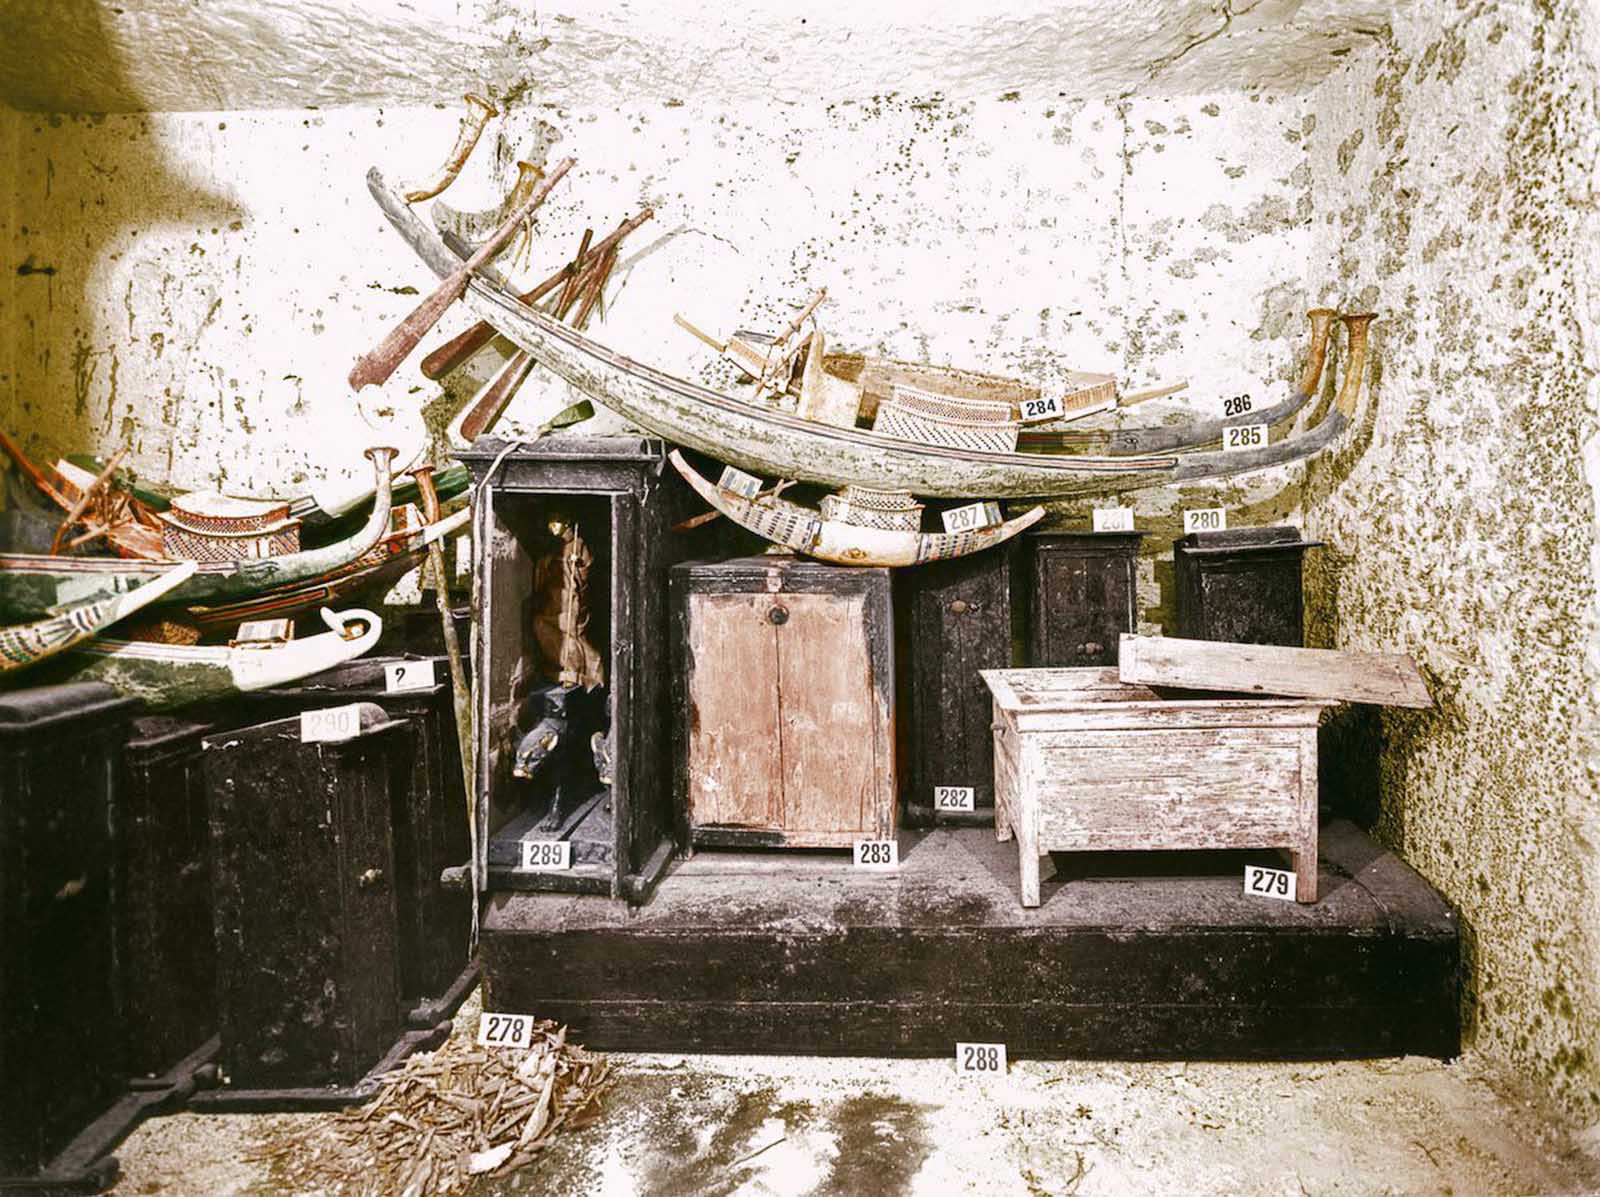 An assortment of model boats in the treasury of the tomb.